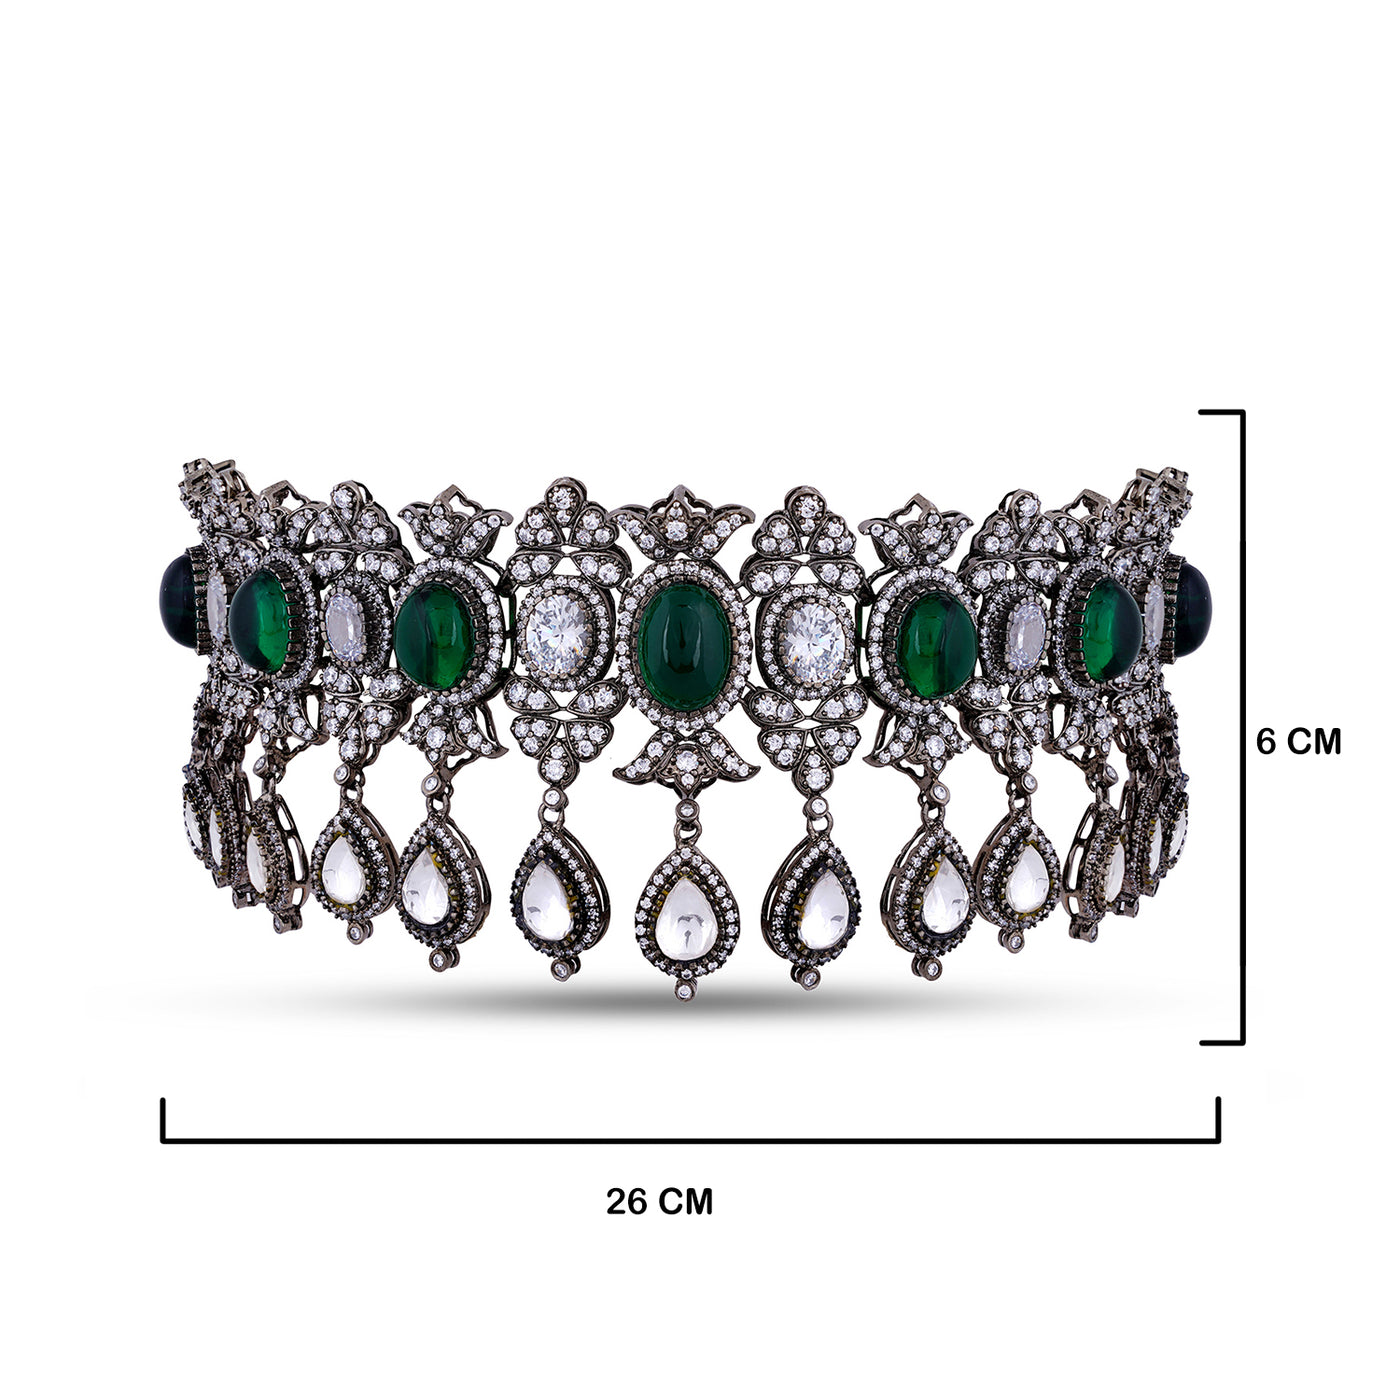 Green and White Stone CZ Choker with measurements in cm. 26cm by 6cm.